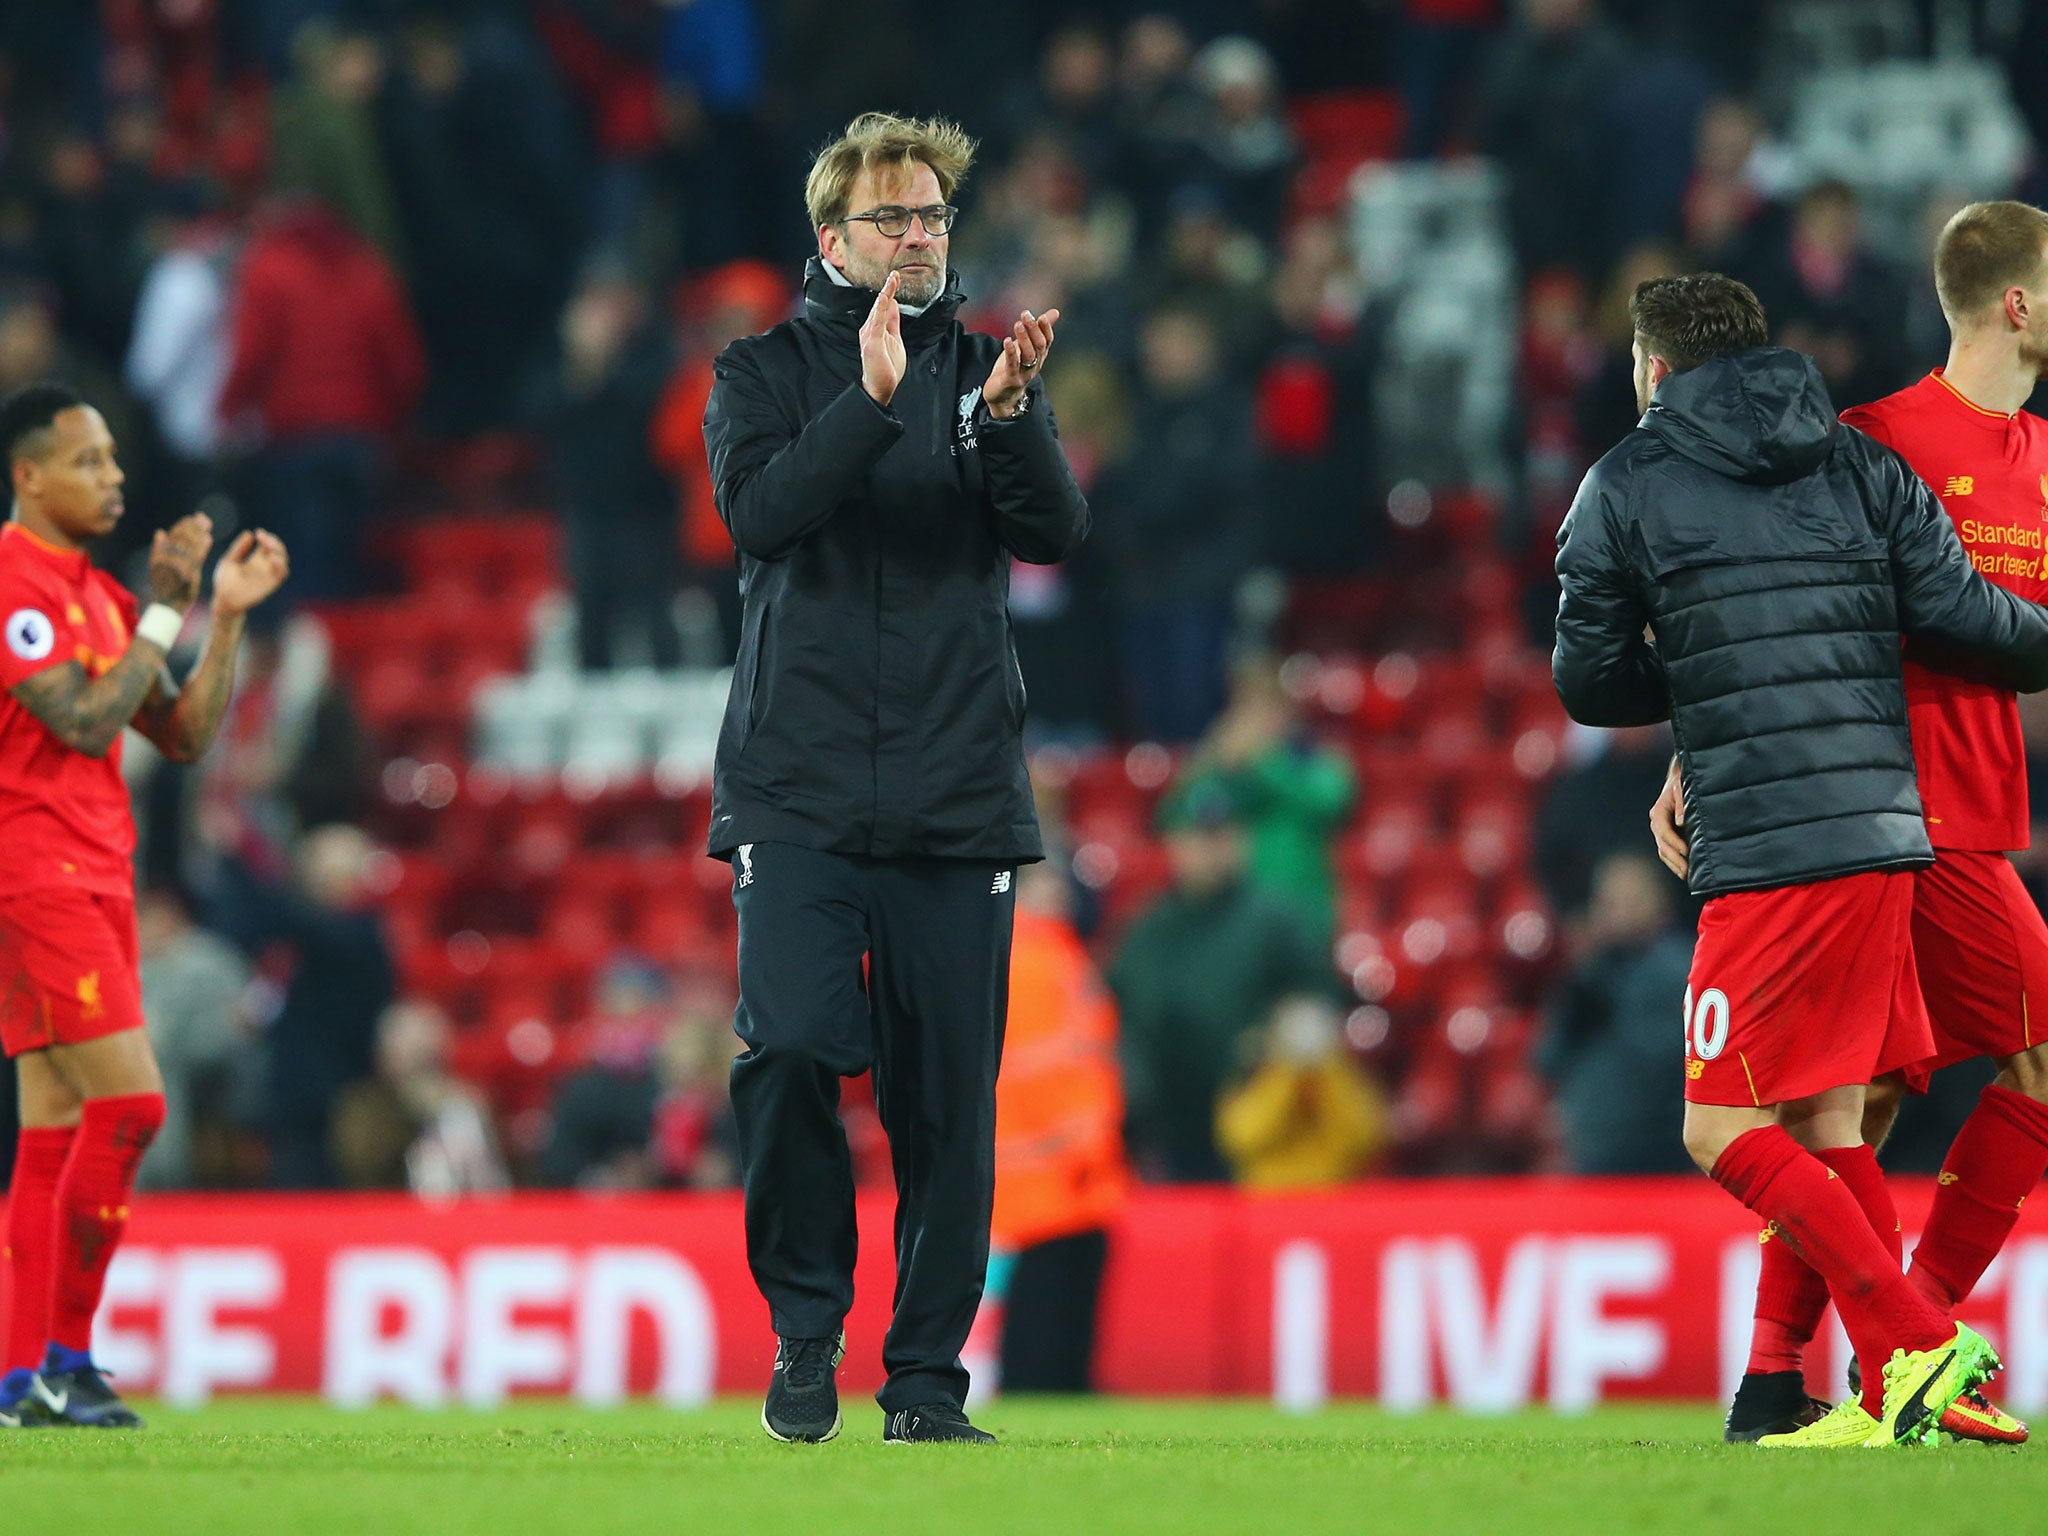 Jurgen Klopp after the final whistle at Anfield